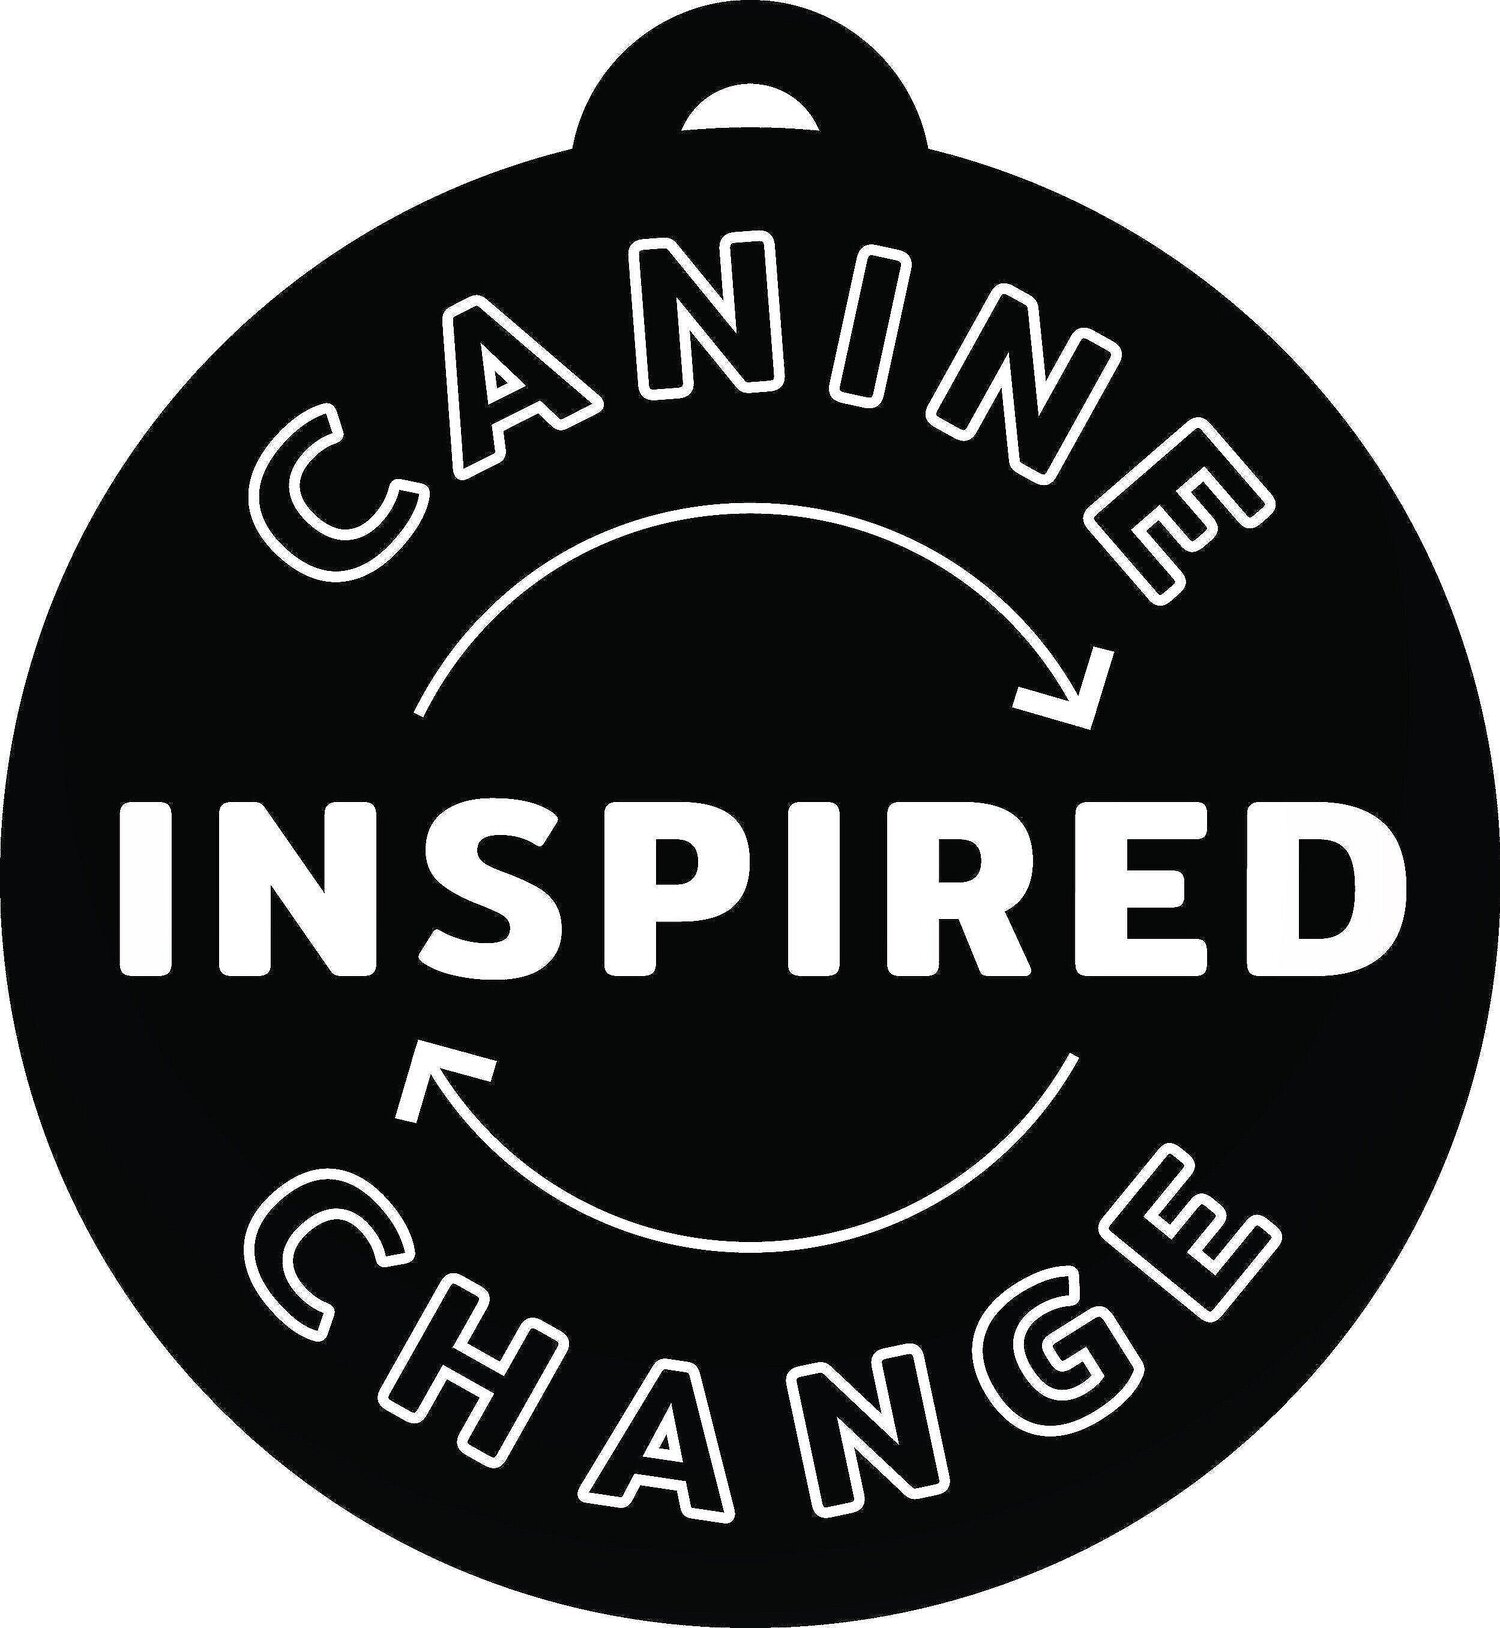 Canine Inspired Change